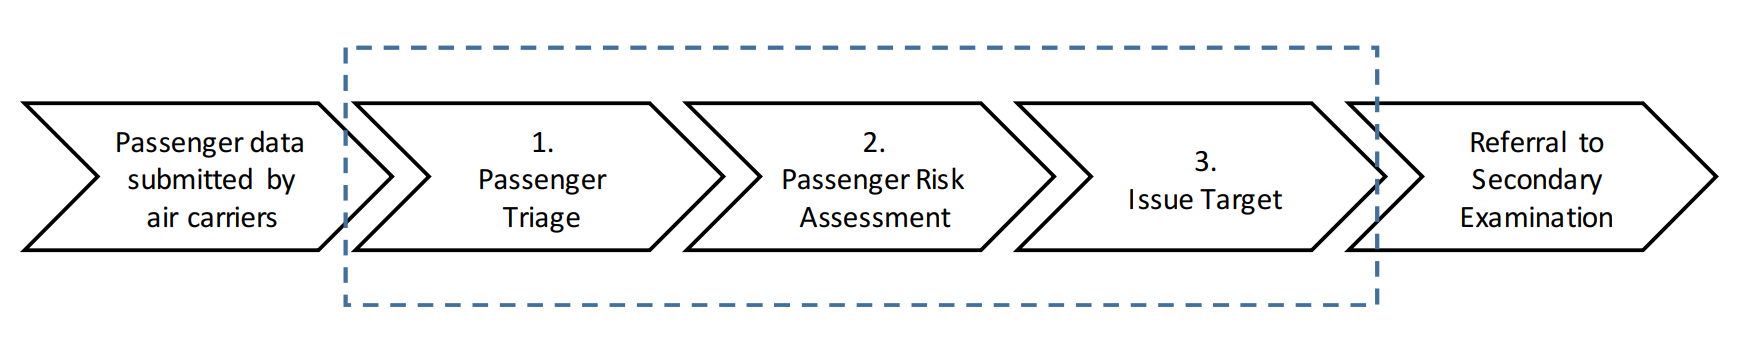 Figure 2: Horizontal diagram of the steps in the Air Passenger Targeting Process